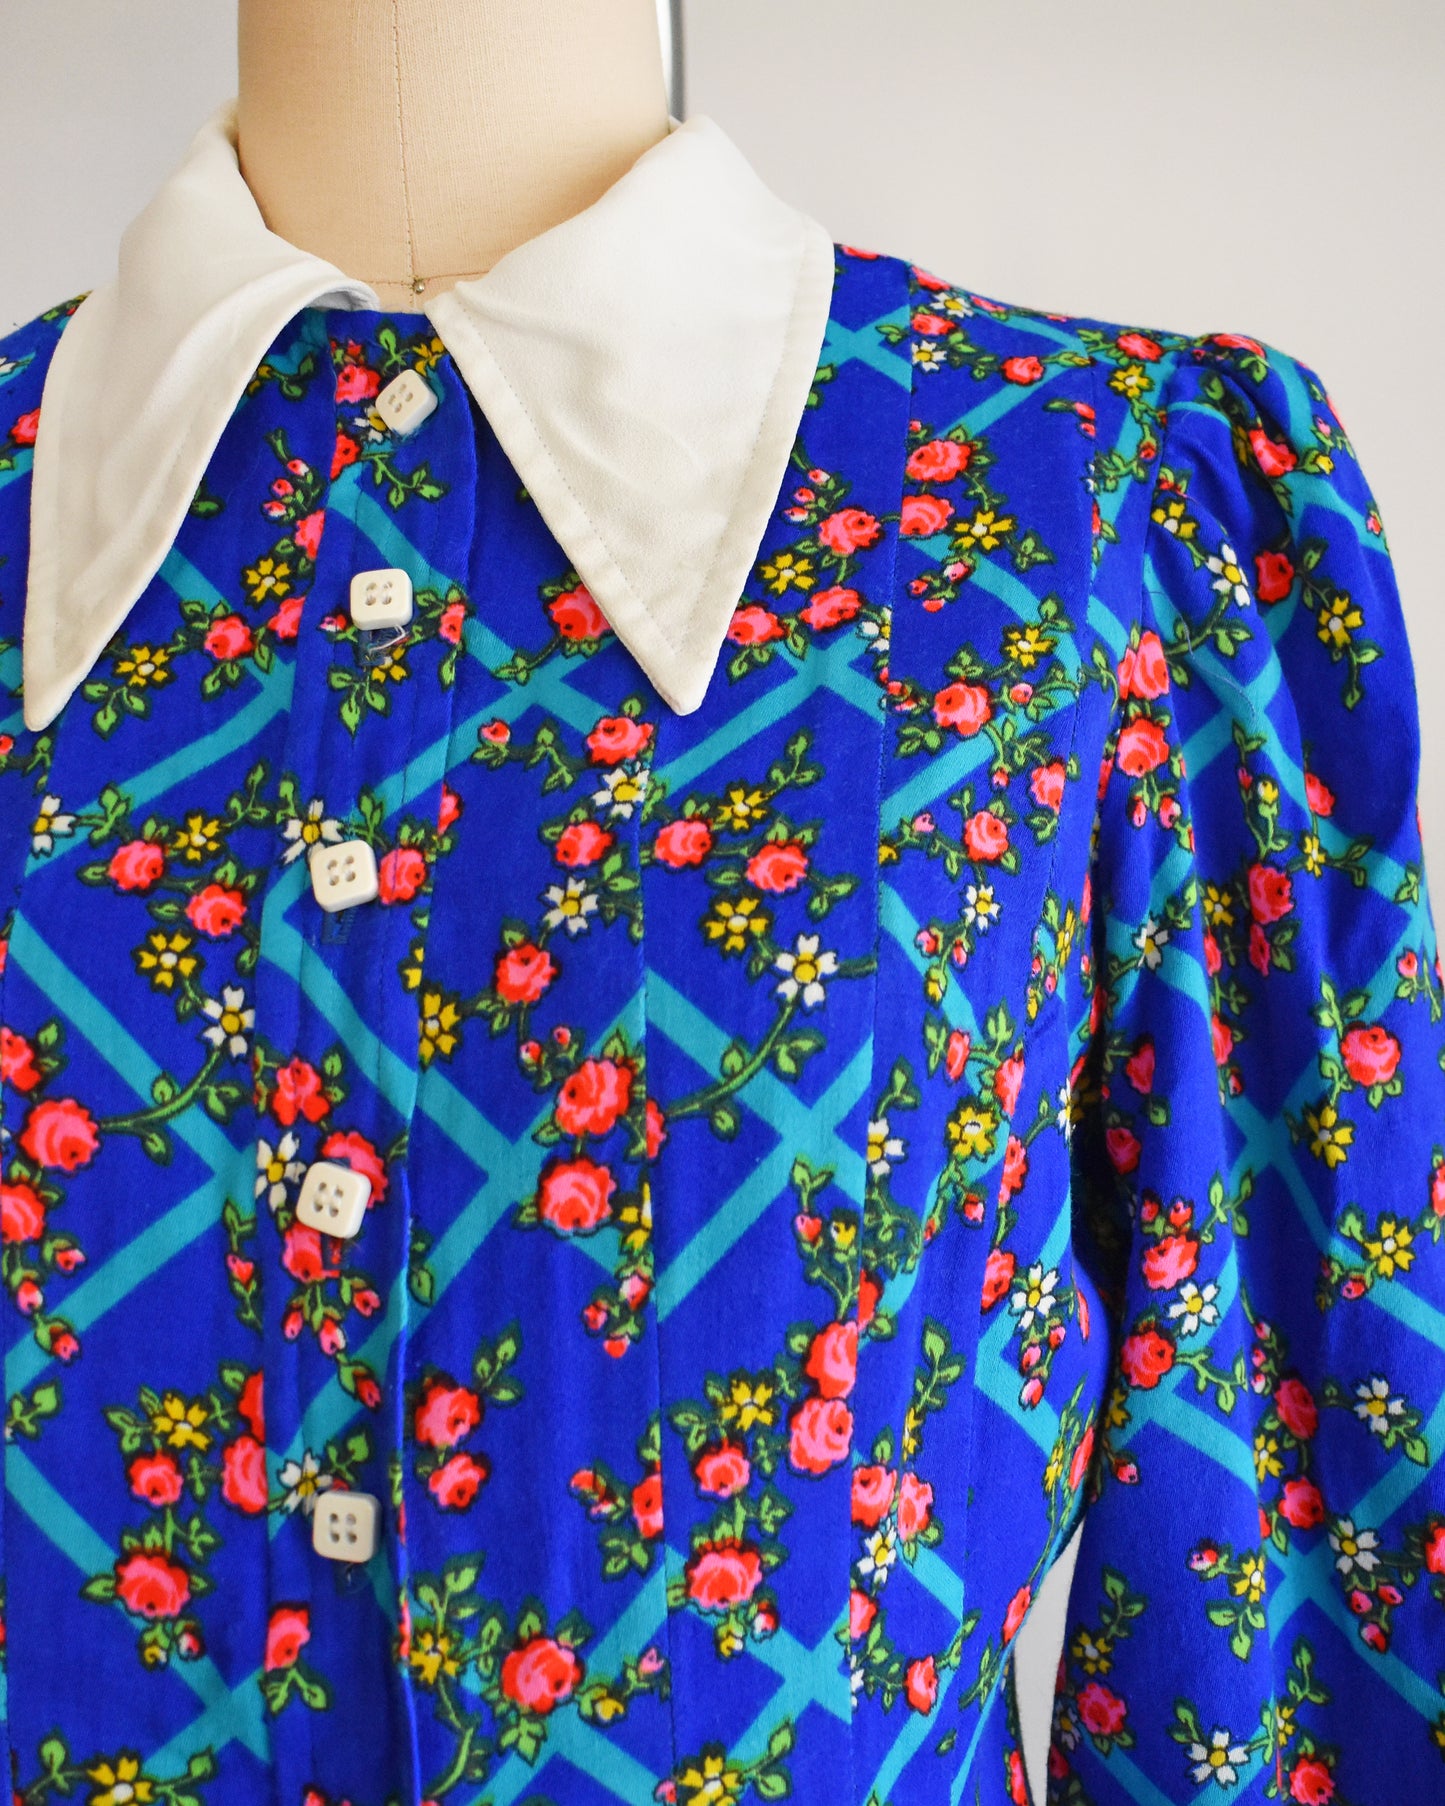 Close up of the collar, floral print, and white buttons